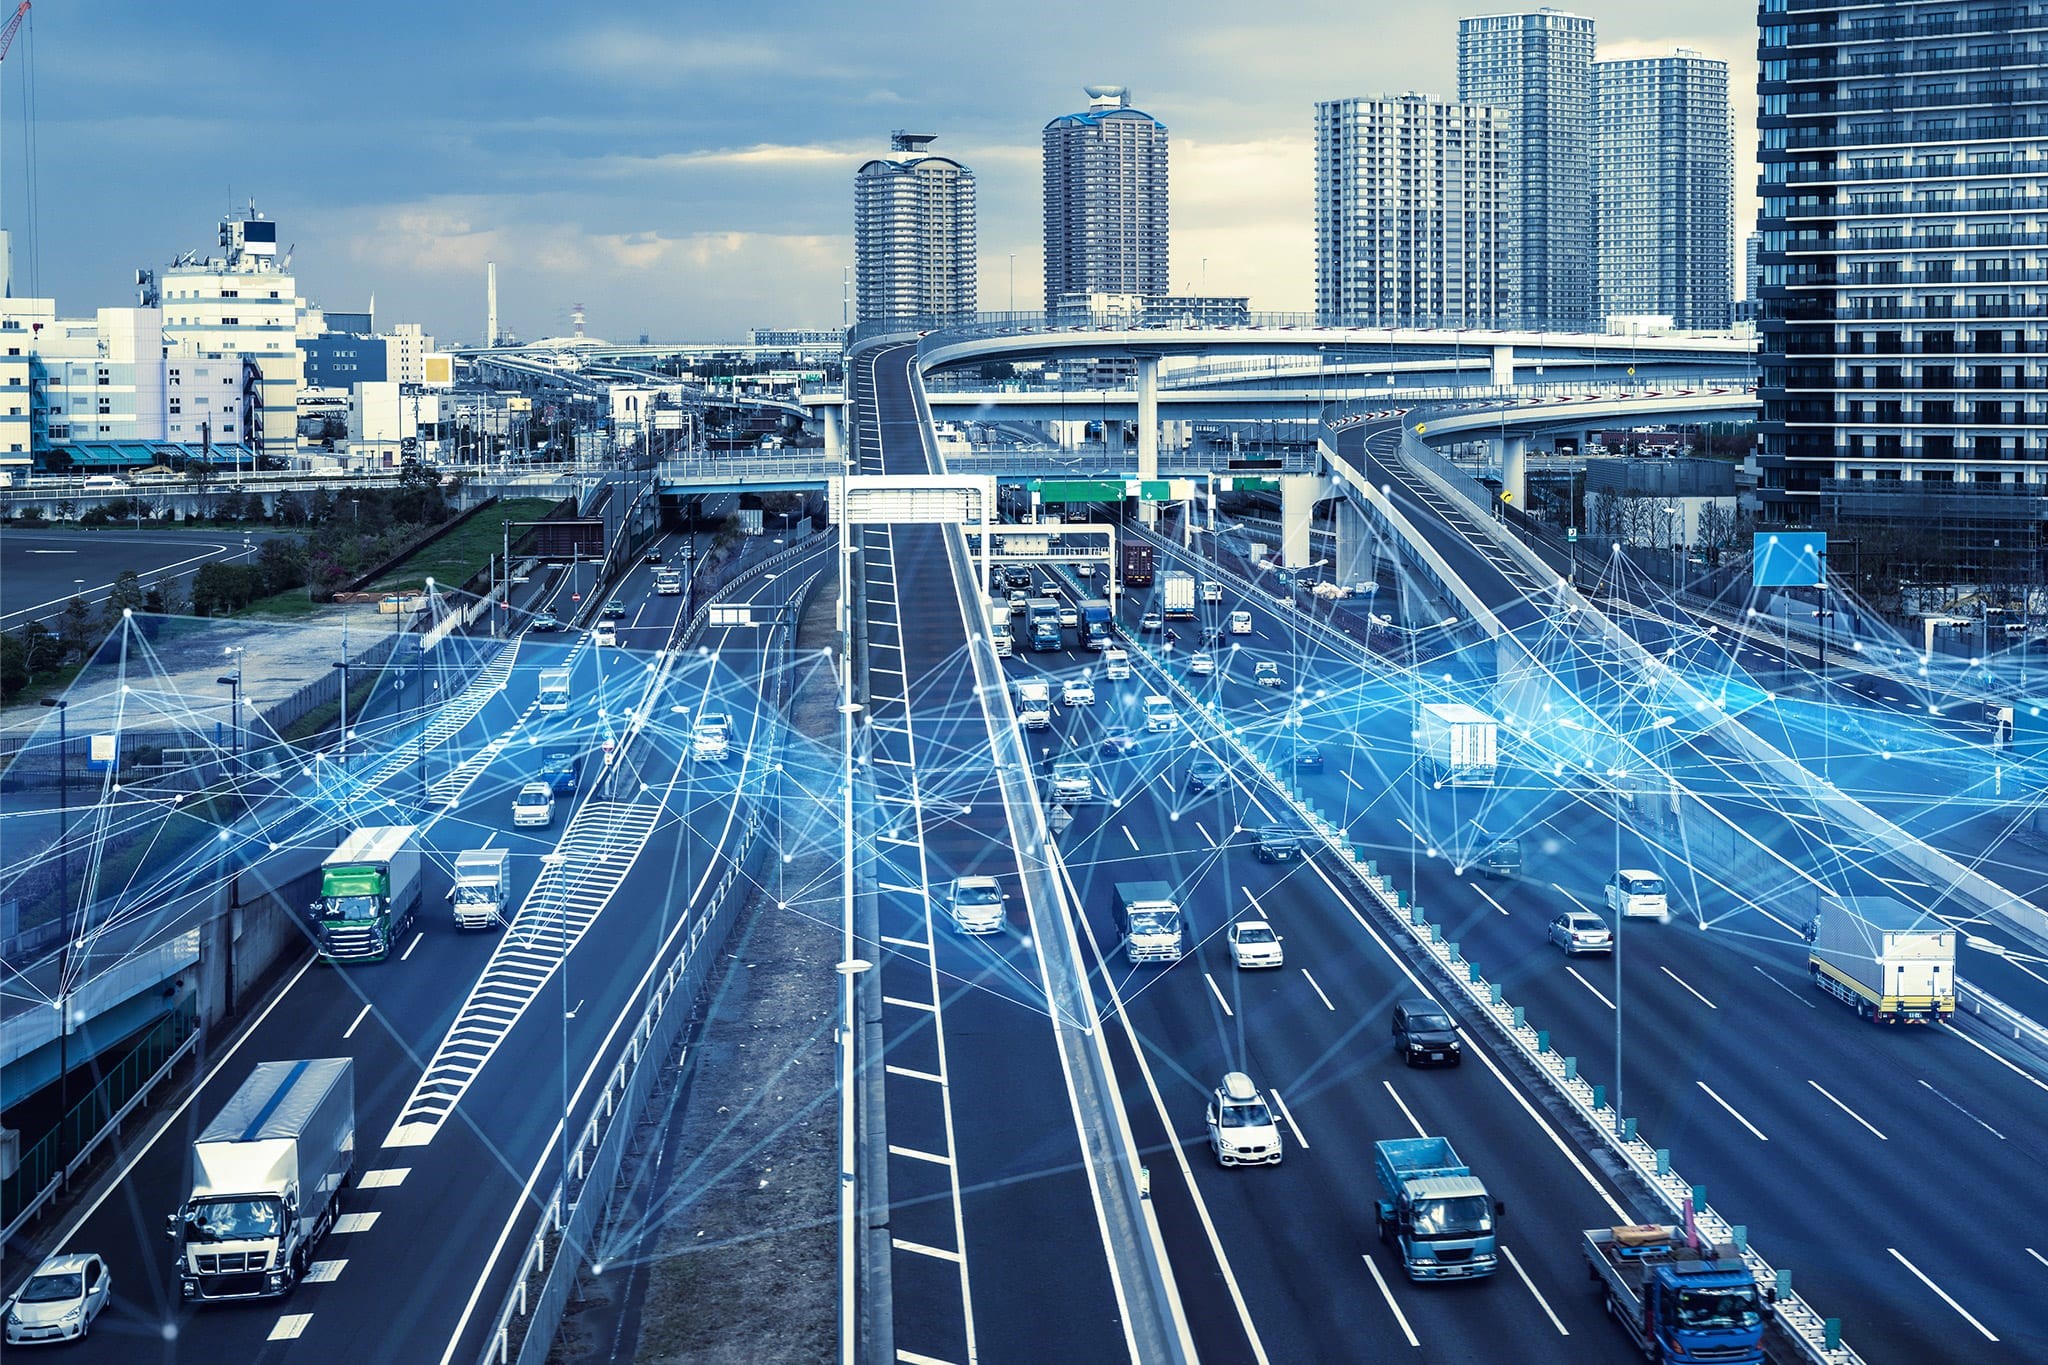 Digital technology to drive efficient, sustainable future transport